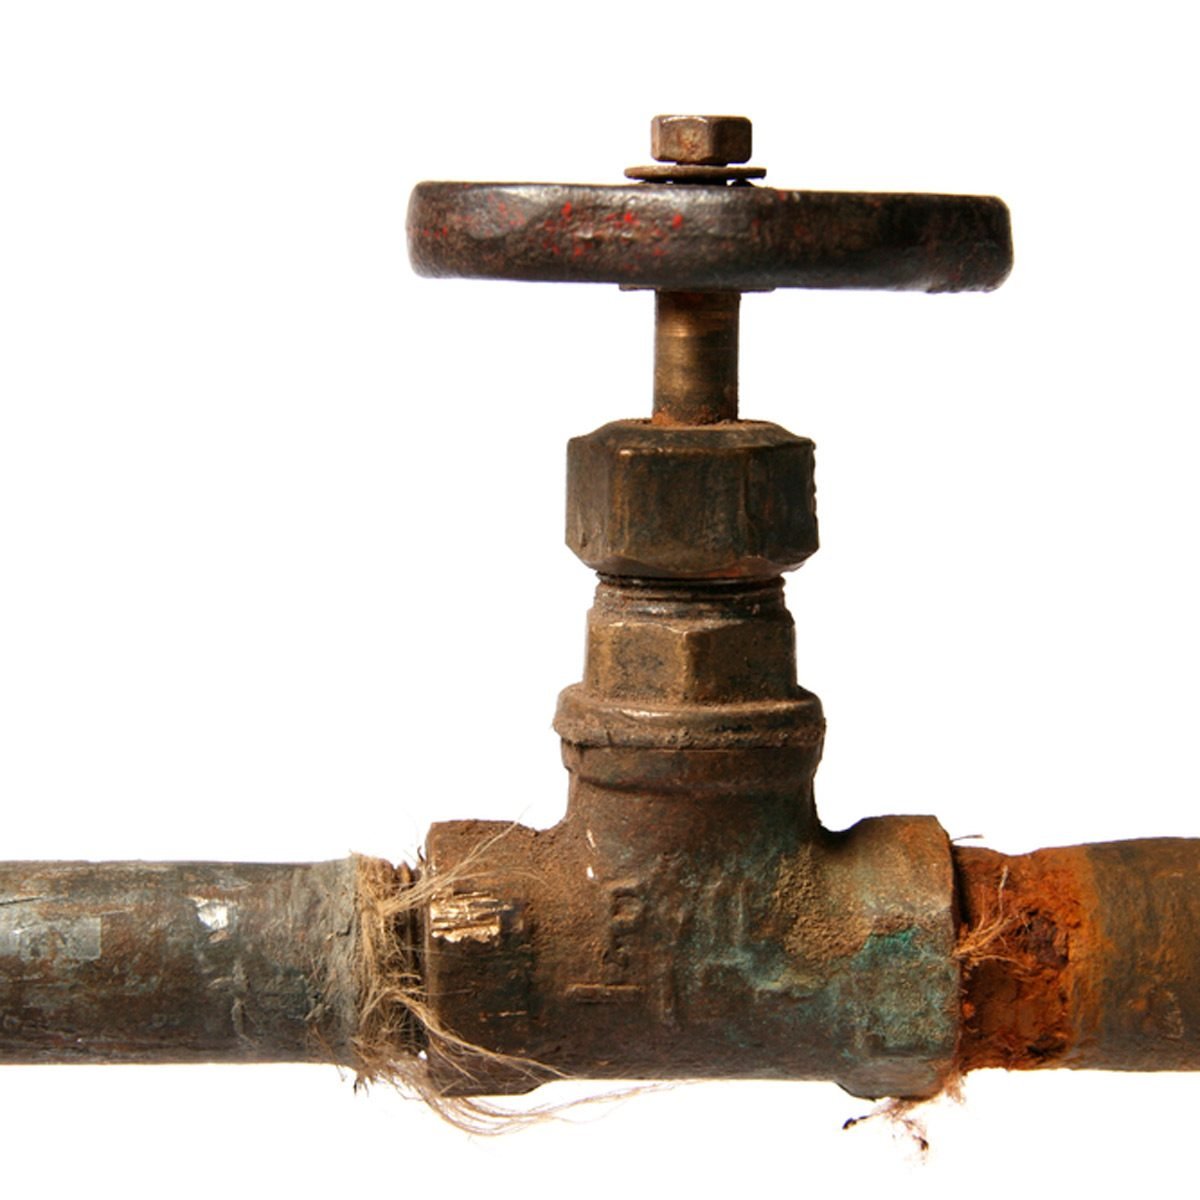 10 Silent Signs Your House has a Major Plumbing Problem